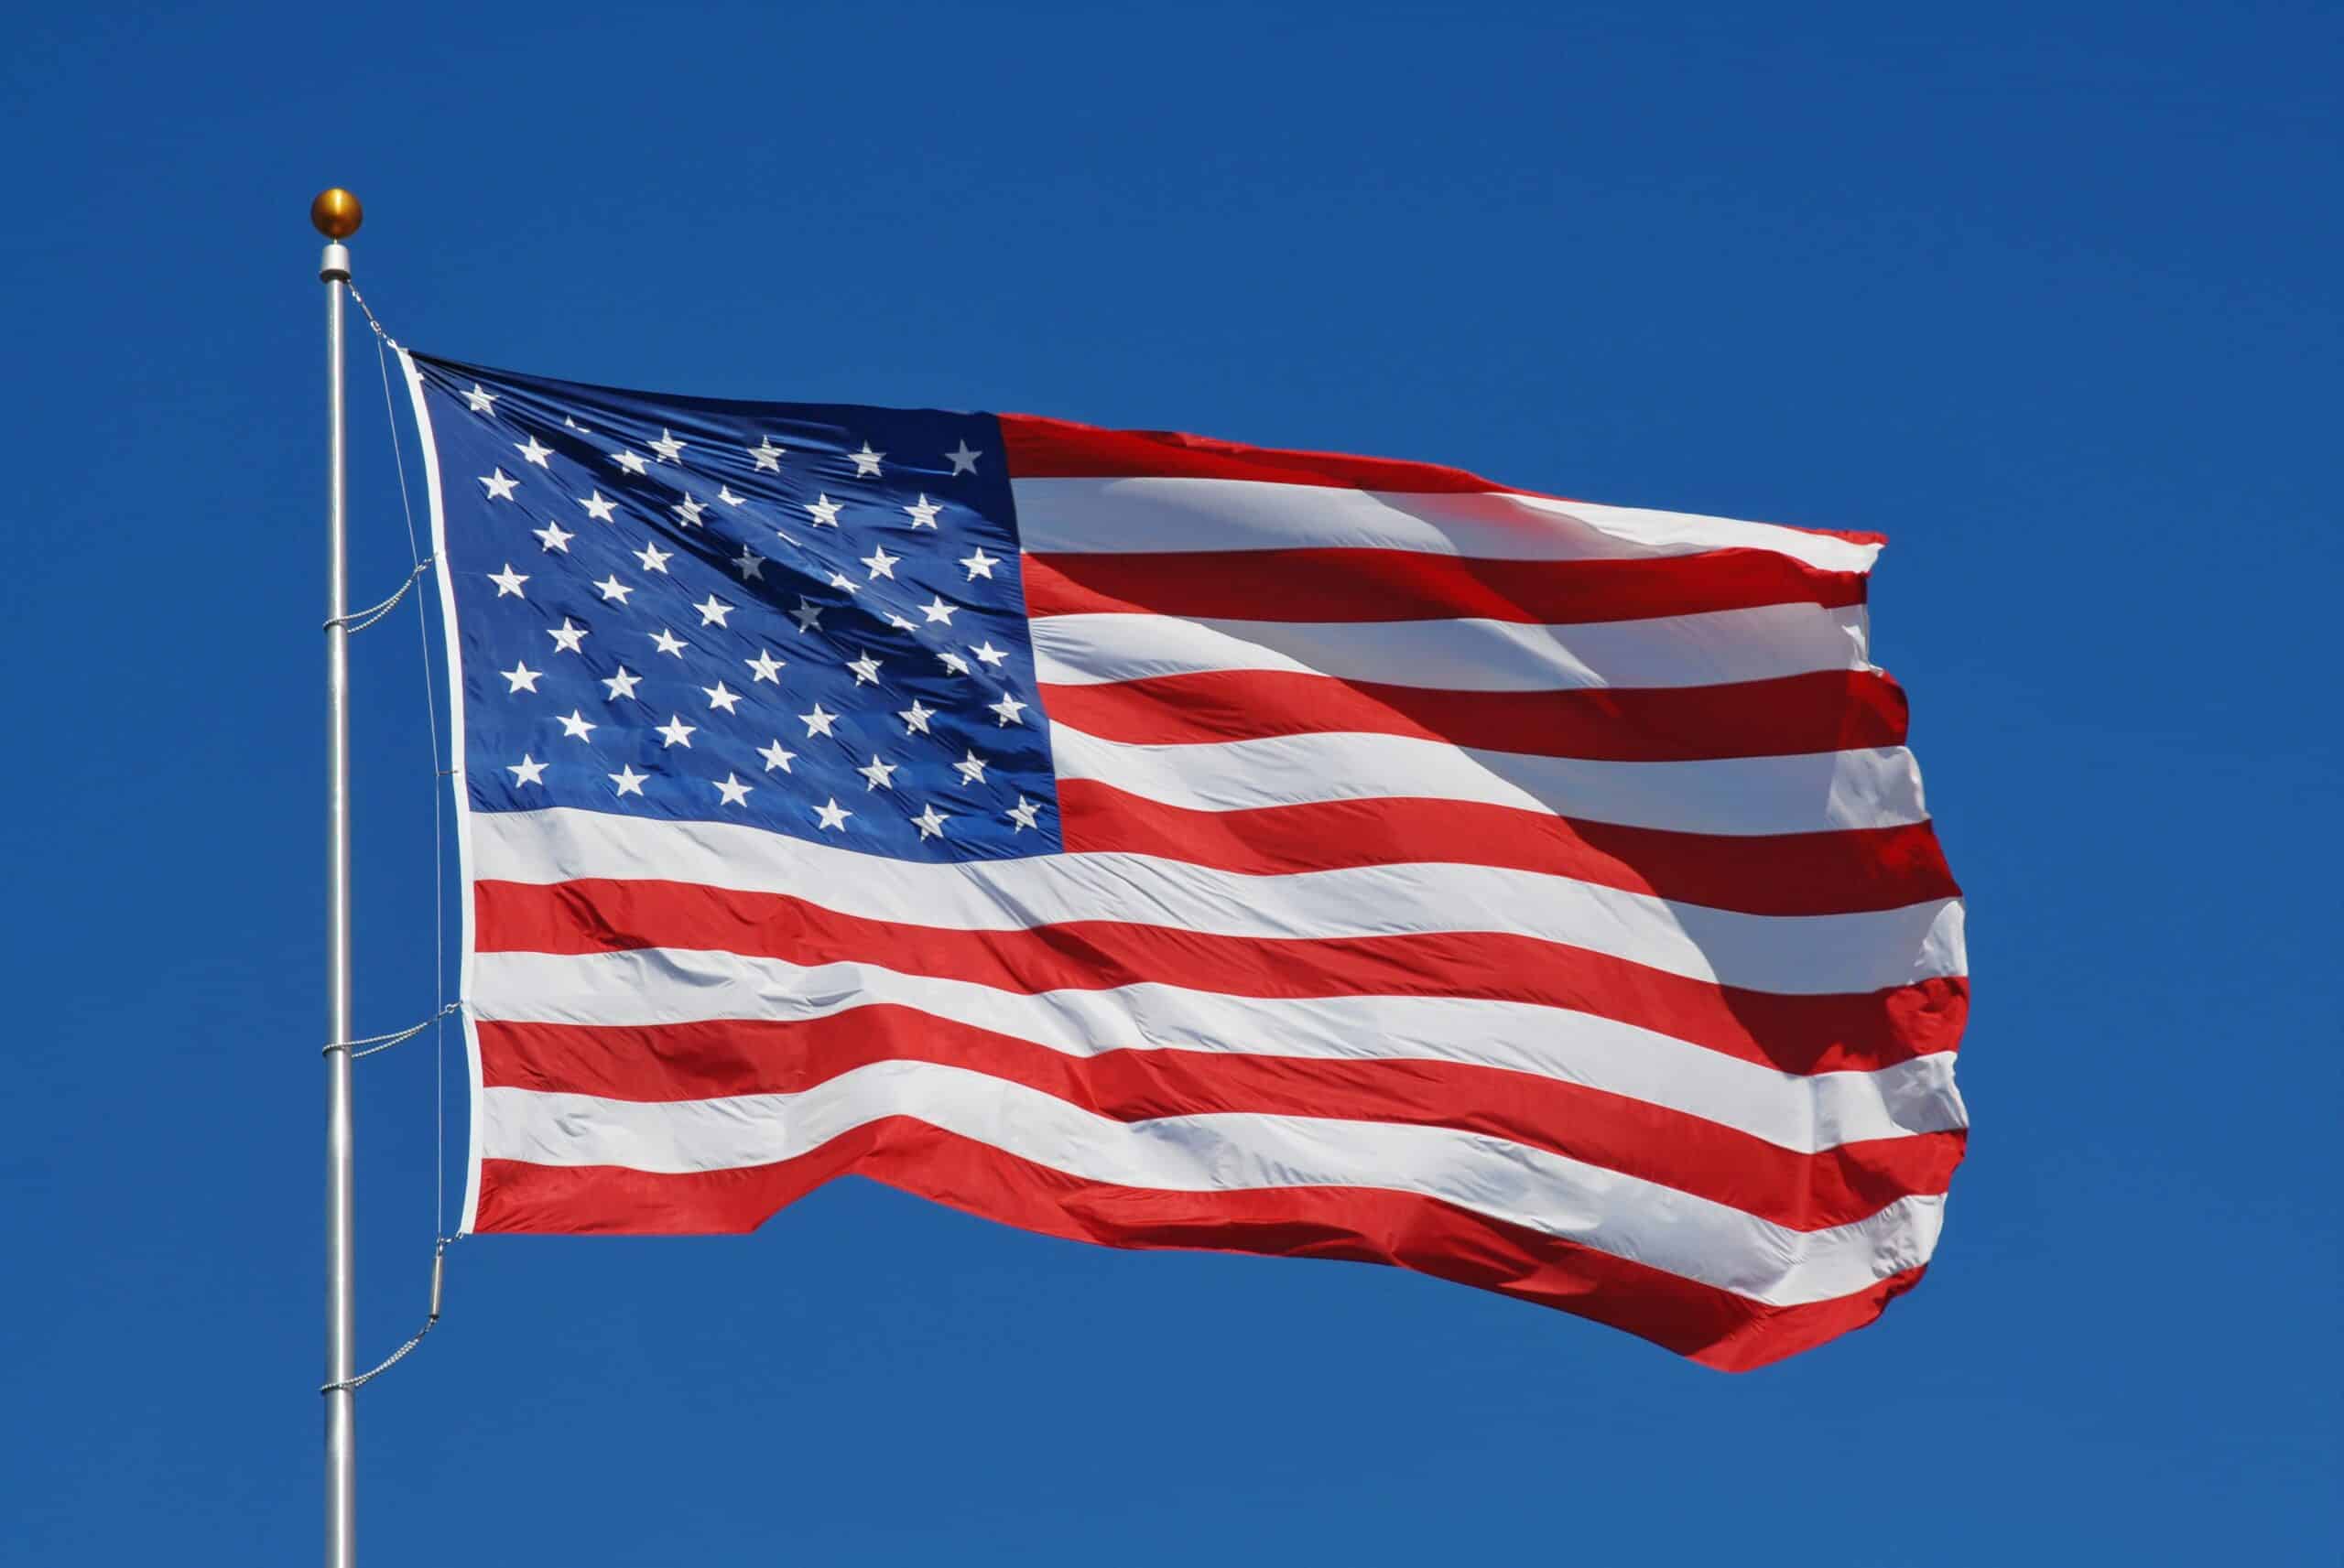 American flag with blue sky behind it.